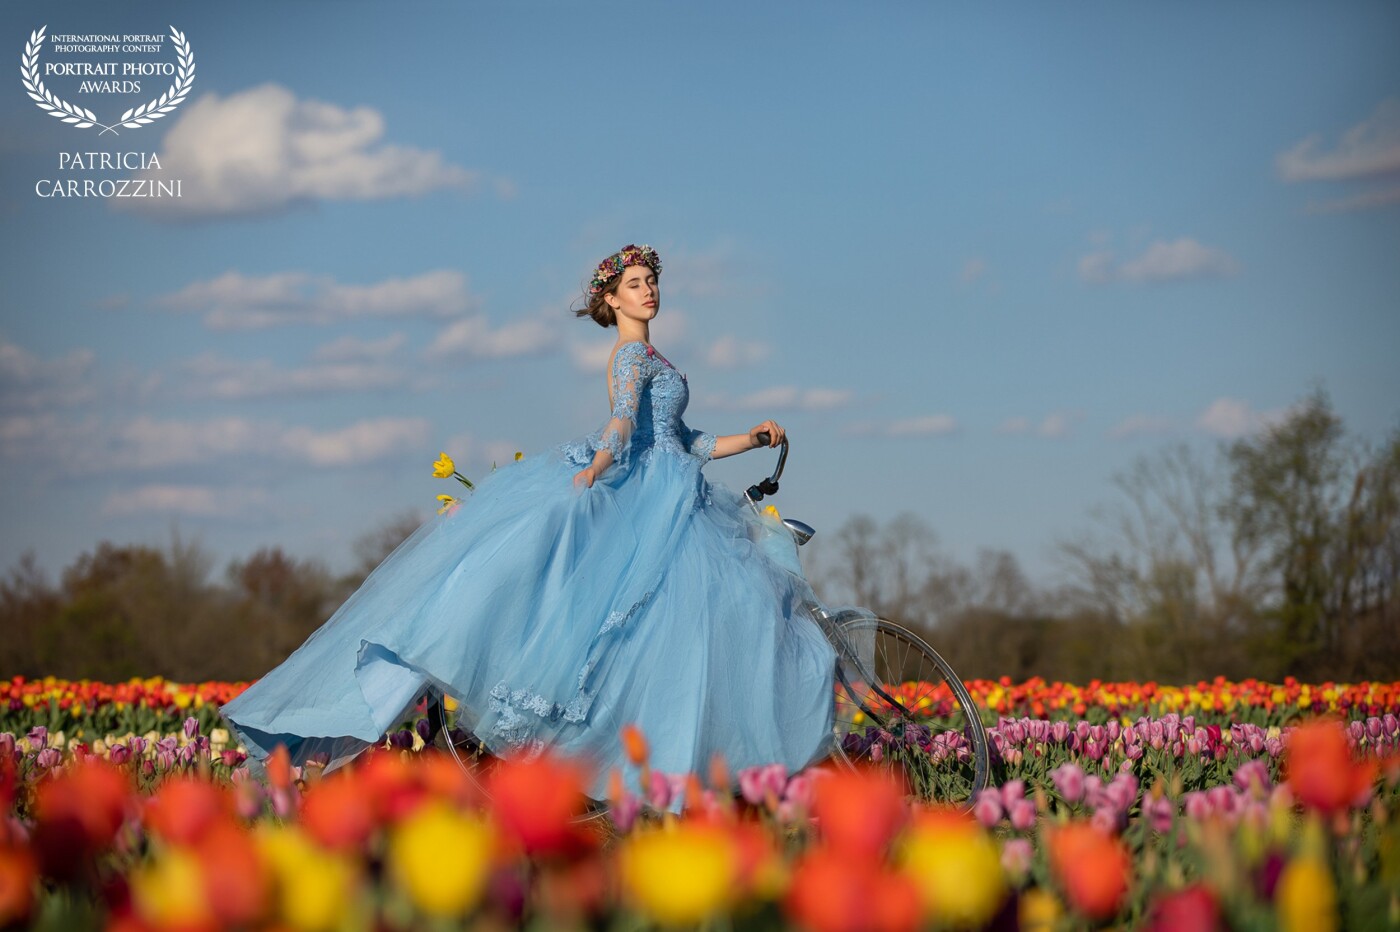 A beautiful young woman is kissed by the gentle breeze that makes tulips dance, on a radiant spring afternoon on one of the farms in the Garden State of New Jersey.